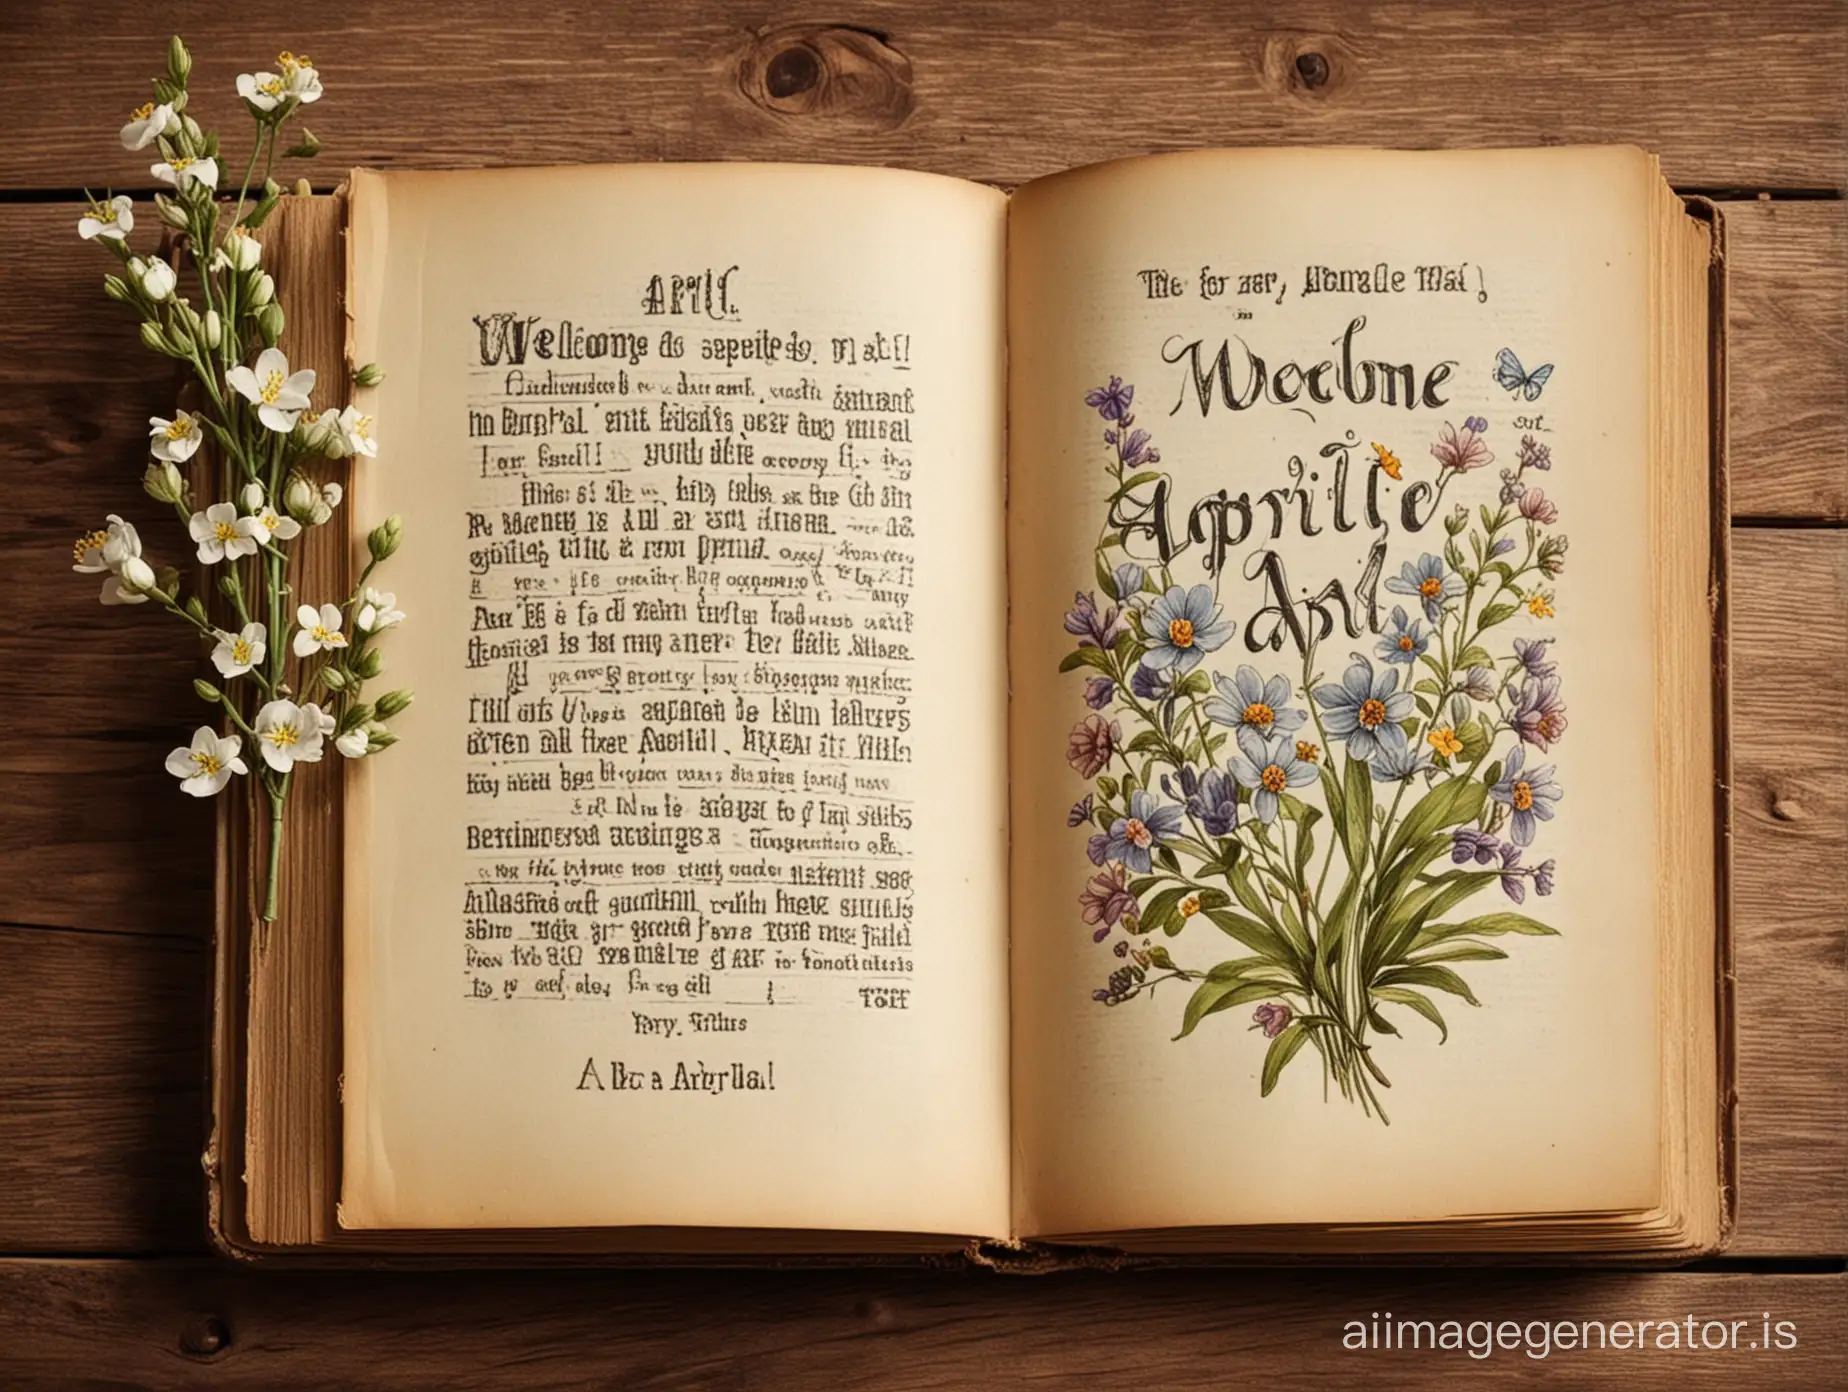 Vintage-TextFilled-Book-Celebrating-April-with-Inspirational-Quotes